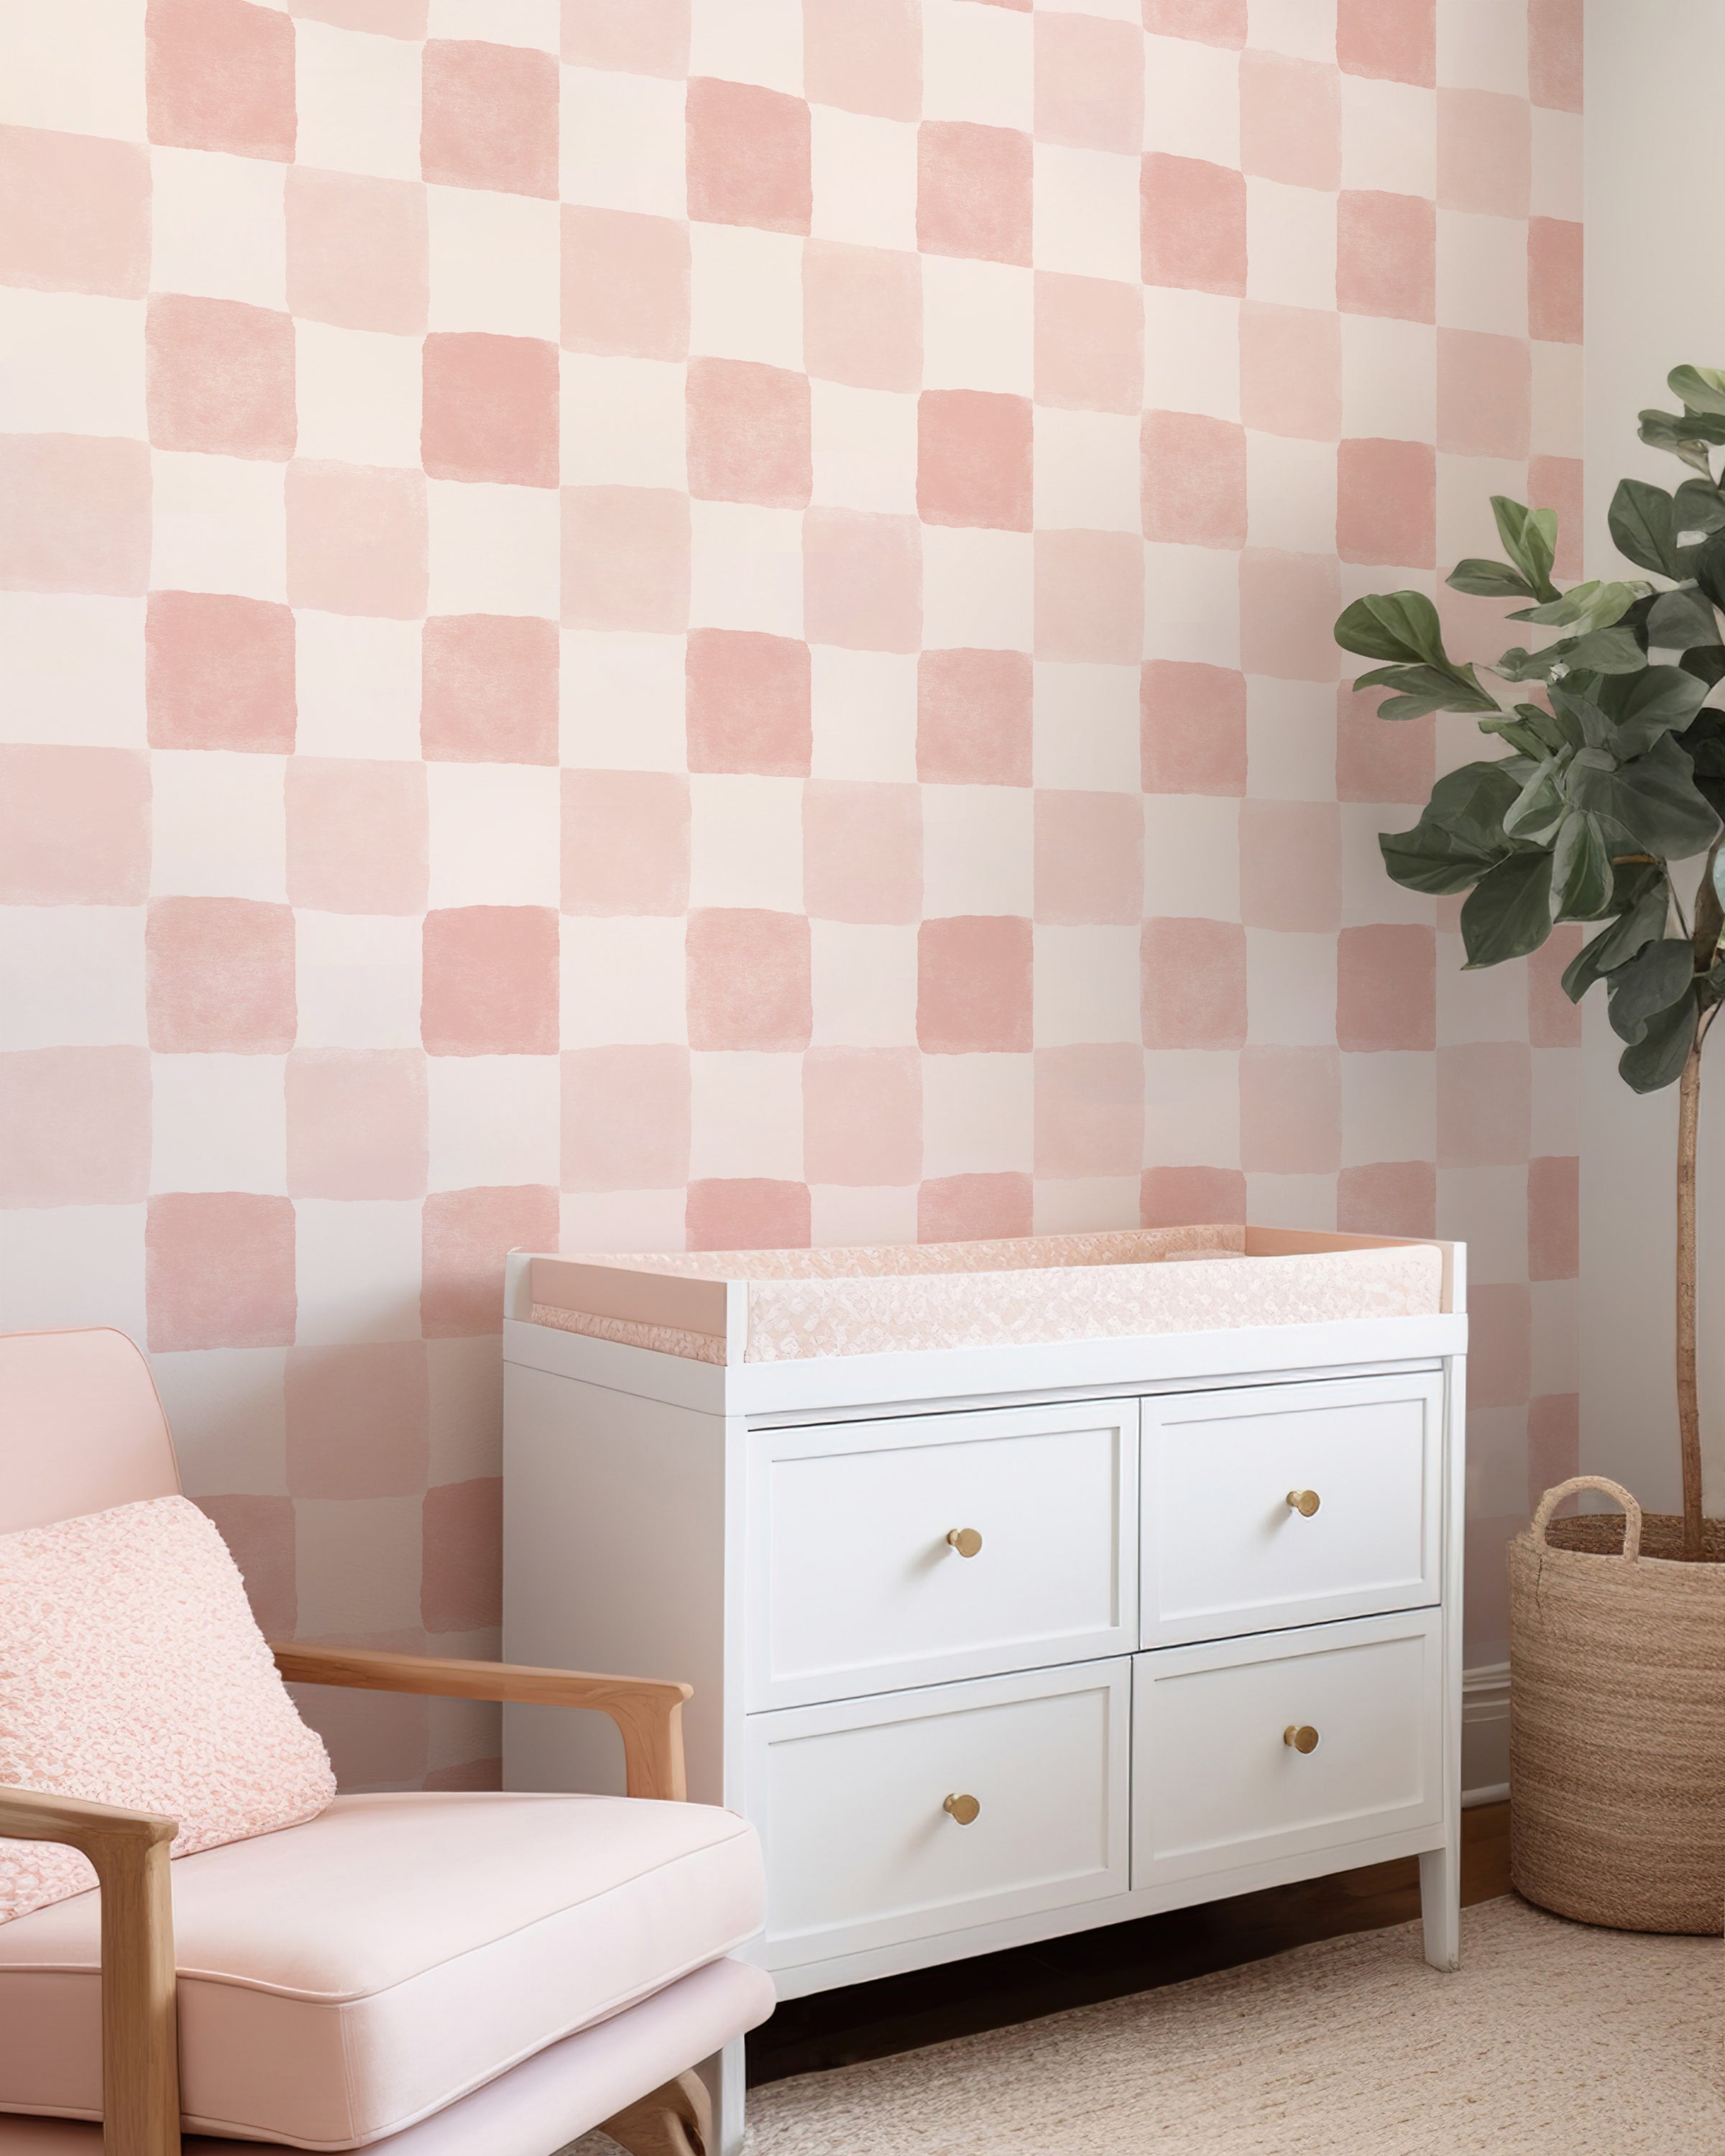 A stylish room setting featuring the Clémence Wallpaper in Dusty Pink with large checkered squares. The room is furnished with a white changing table, a pale pink armchair, and a potted green plant, offering a calm and elegant nursery space